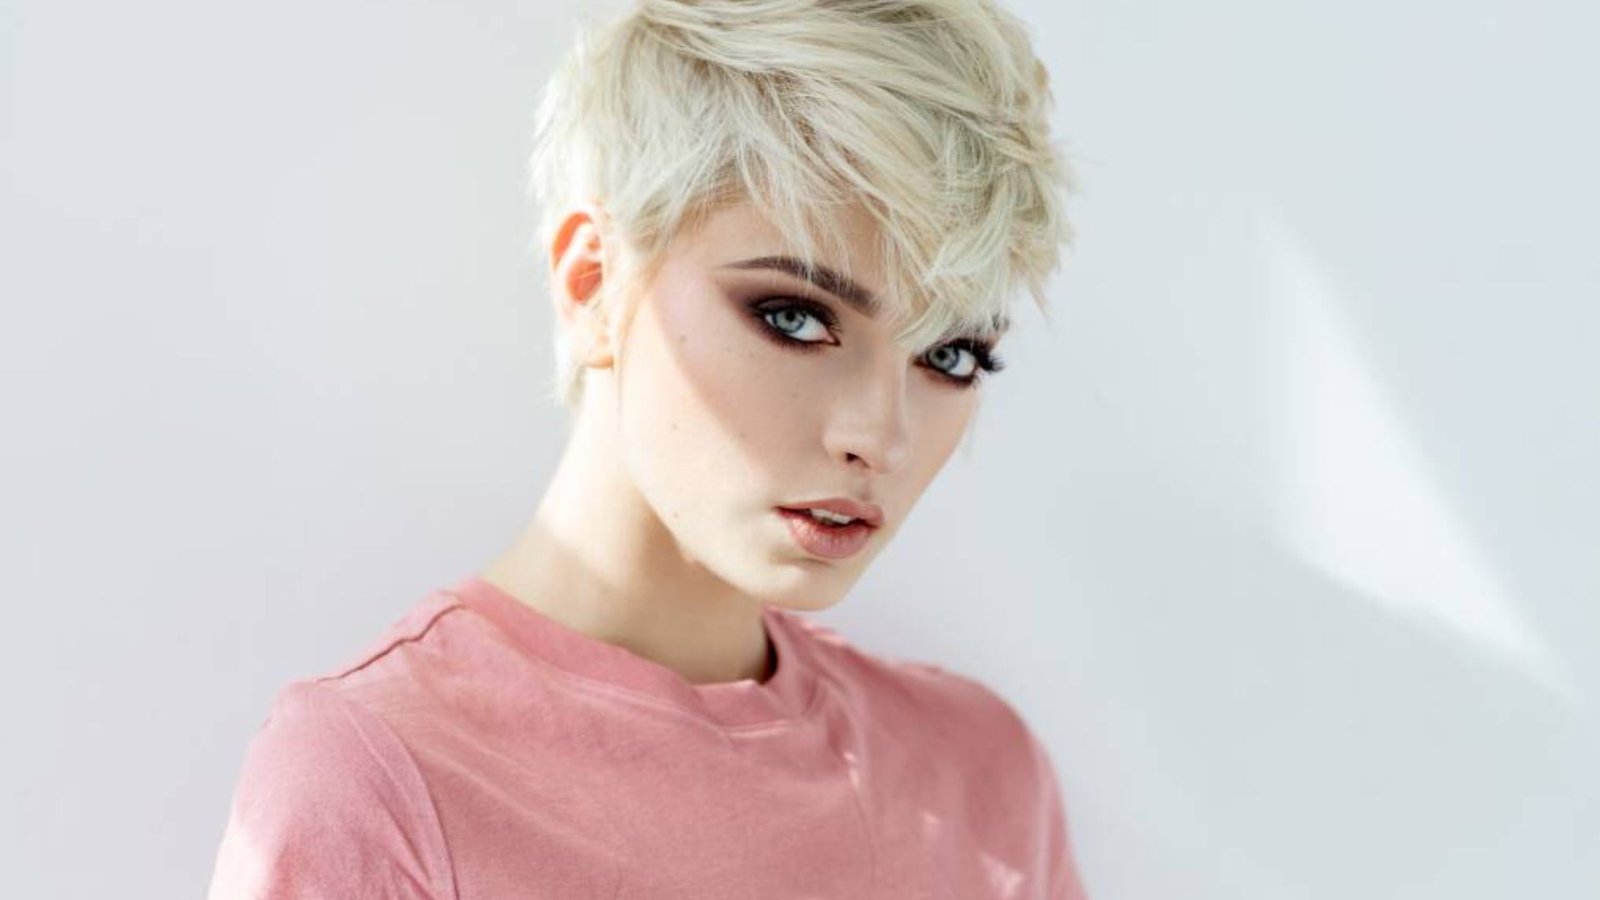 this image shows Short Hair